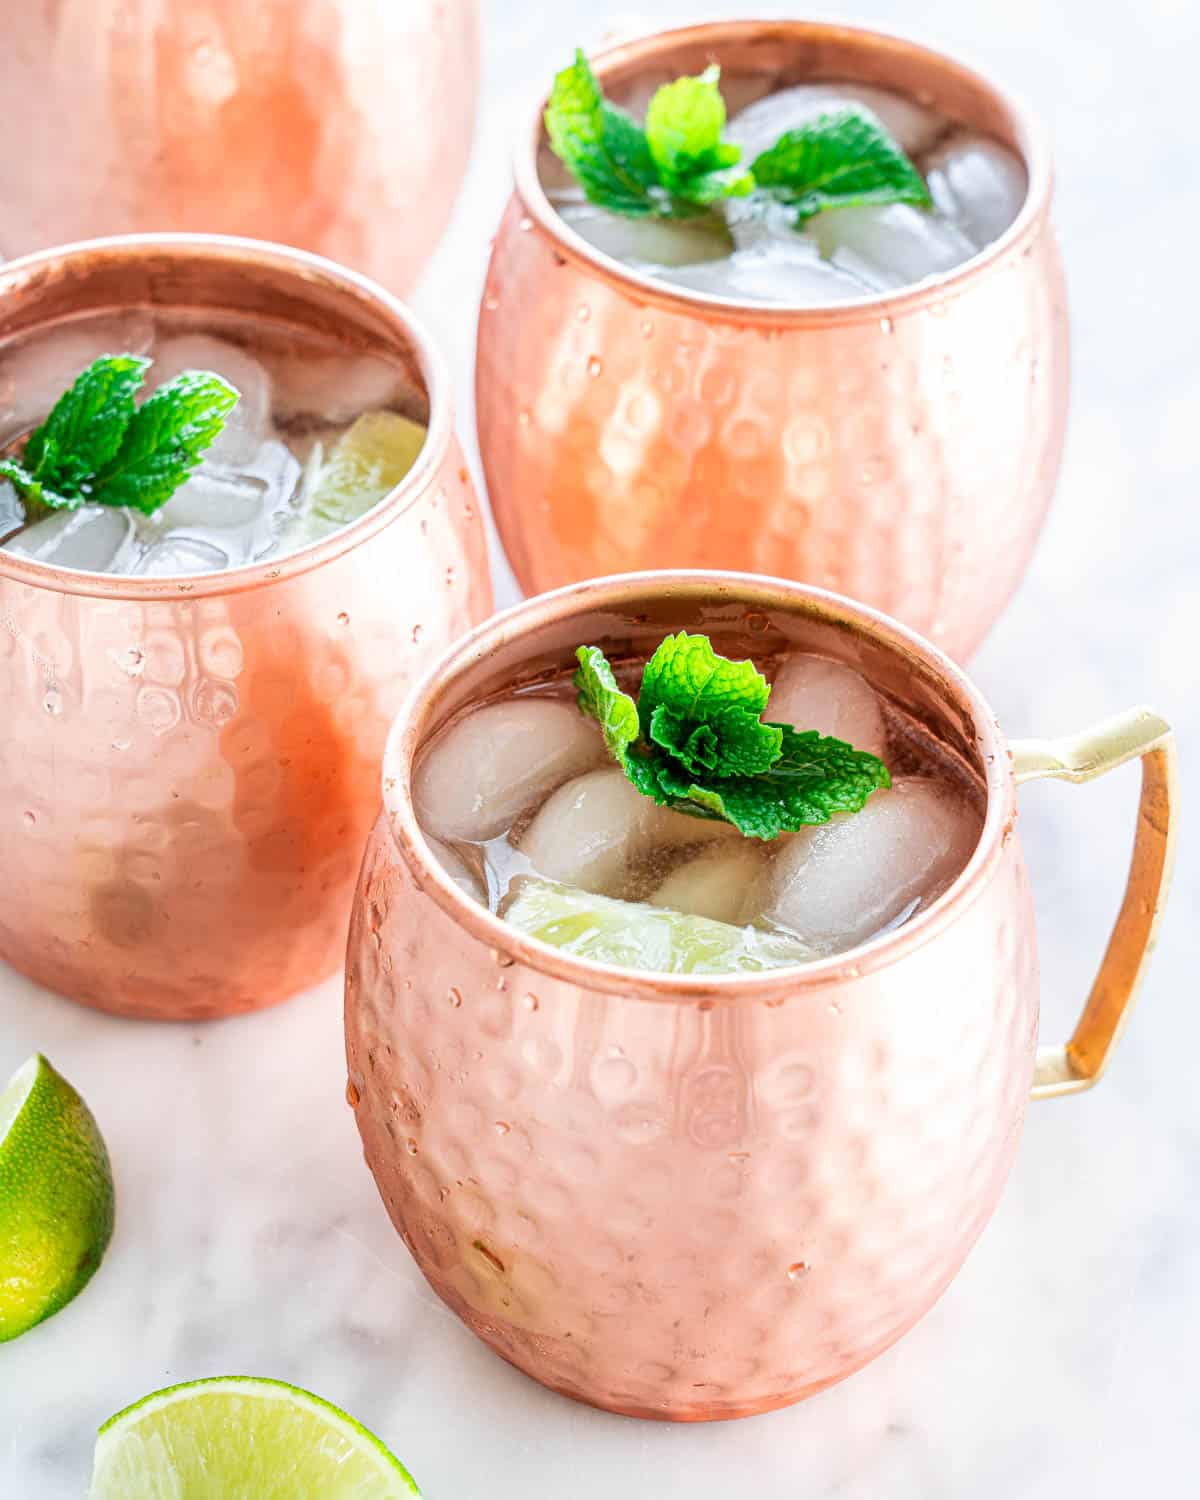 mowcow mule in 4 copper mugs garnished with mint